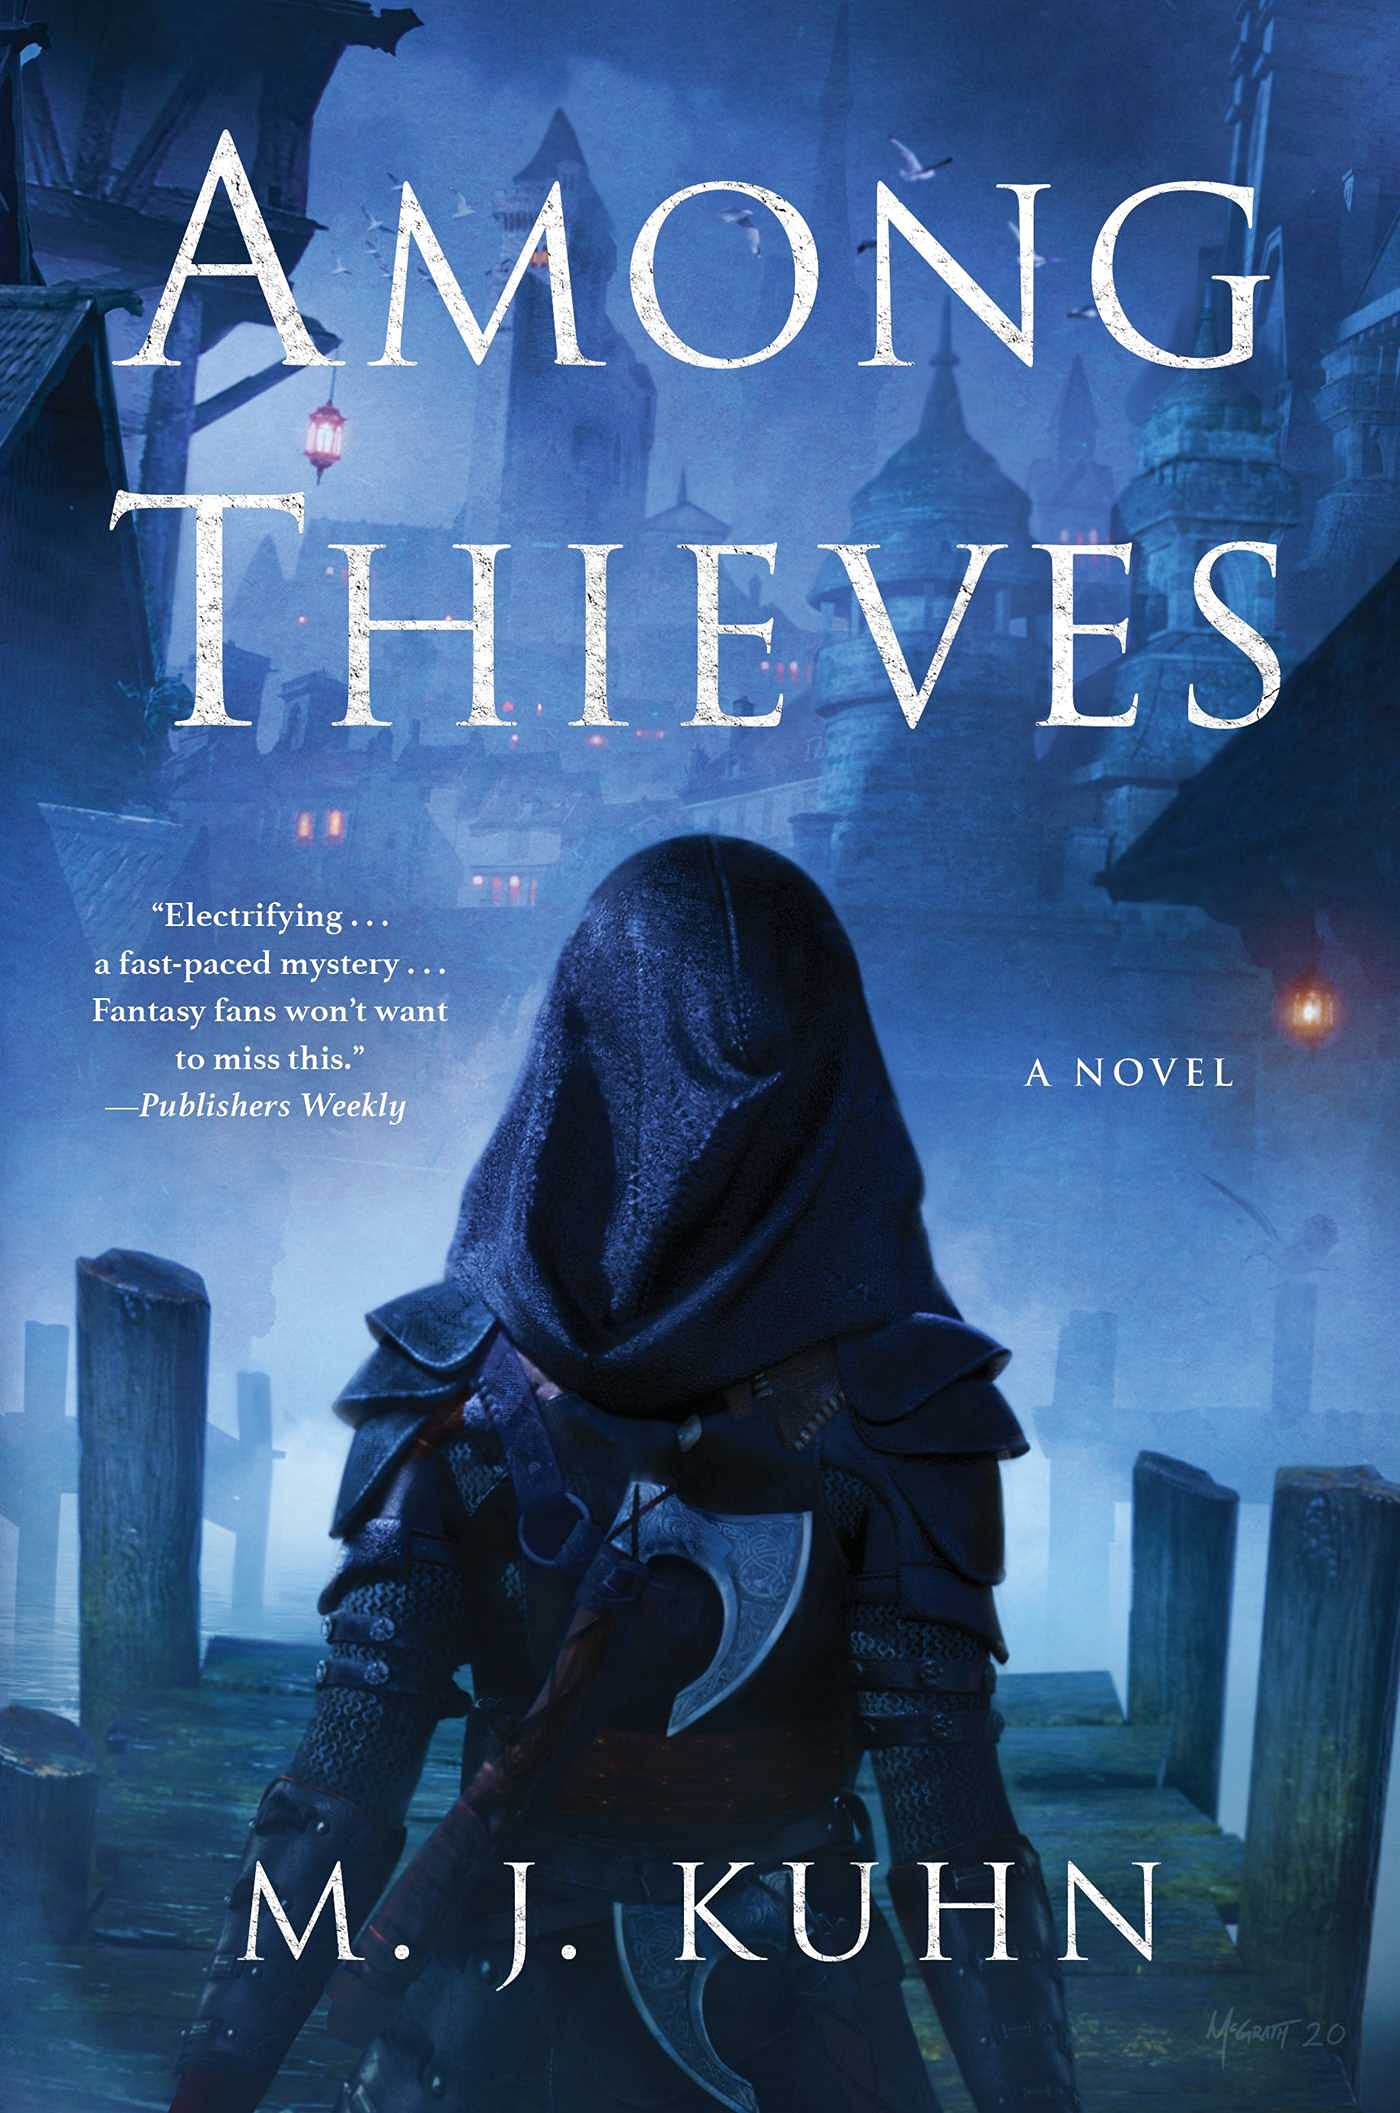 Image for "Among Thieves"